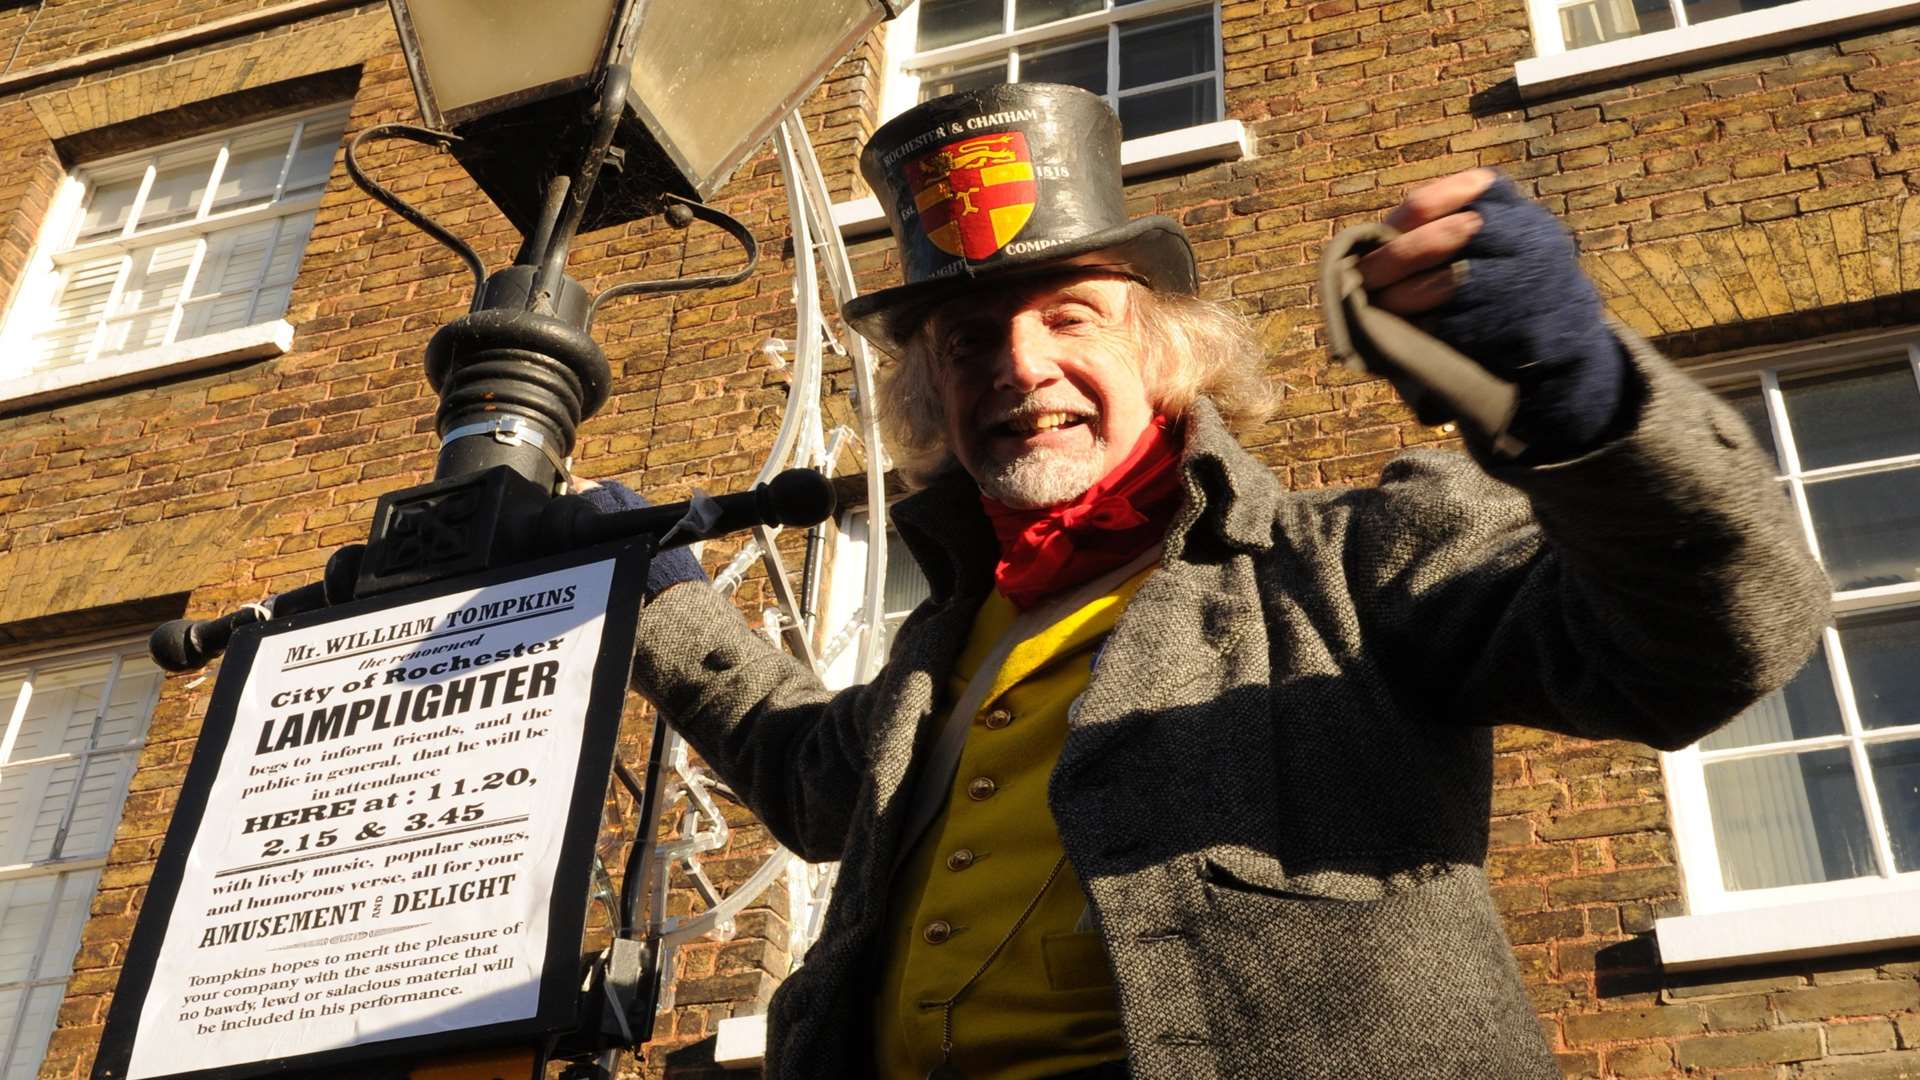 The Lamplighter will be out in Rochester High Street for the Dickensian Christmas Festival Picture: Steve Crispe